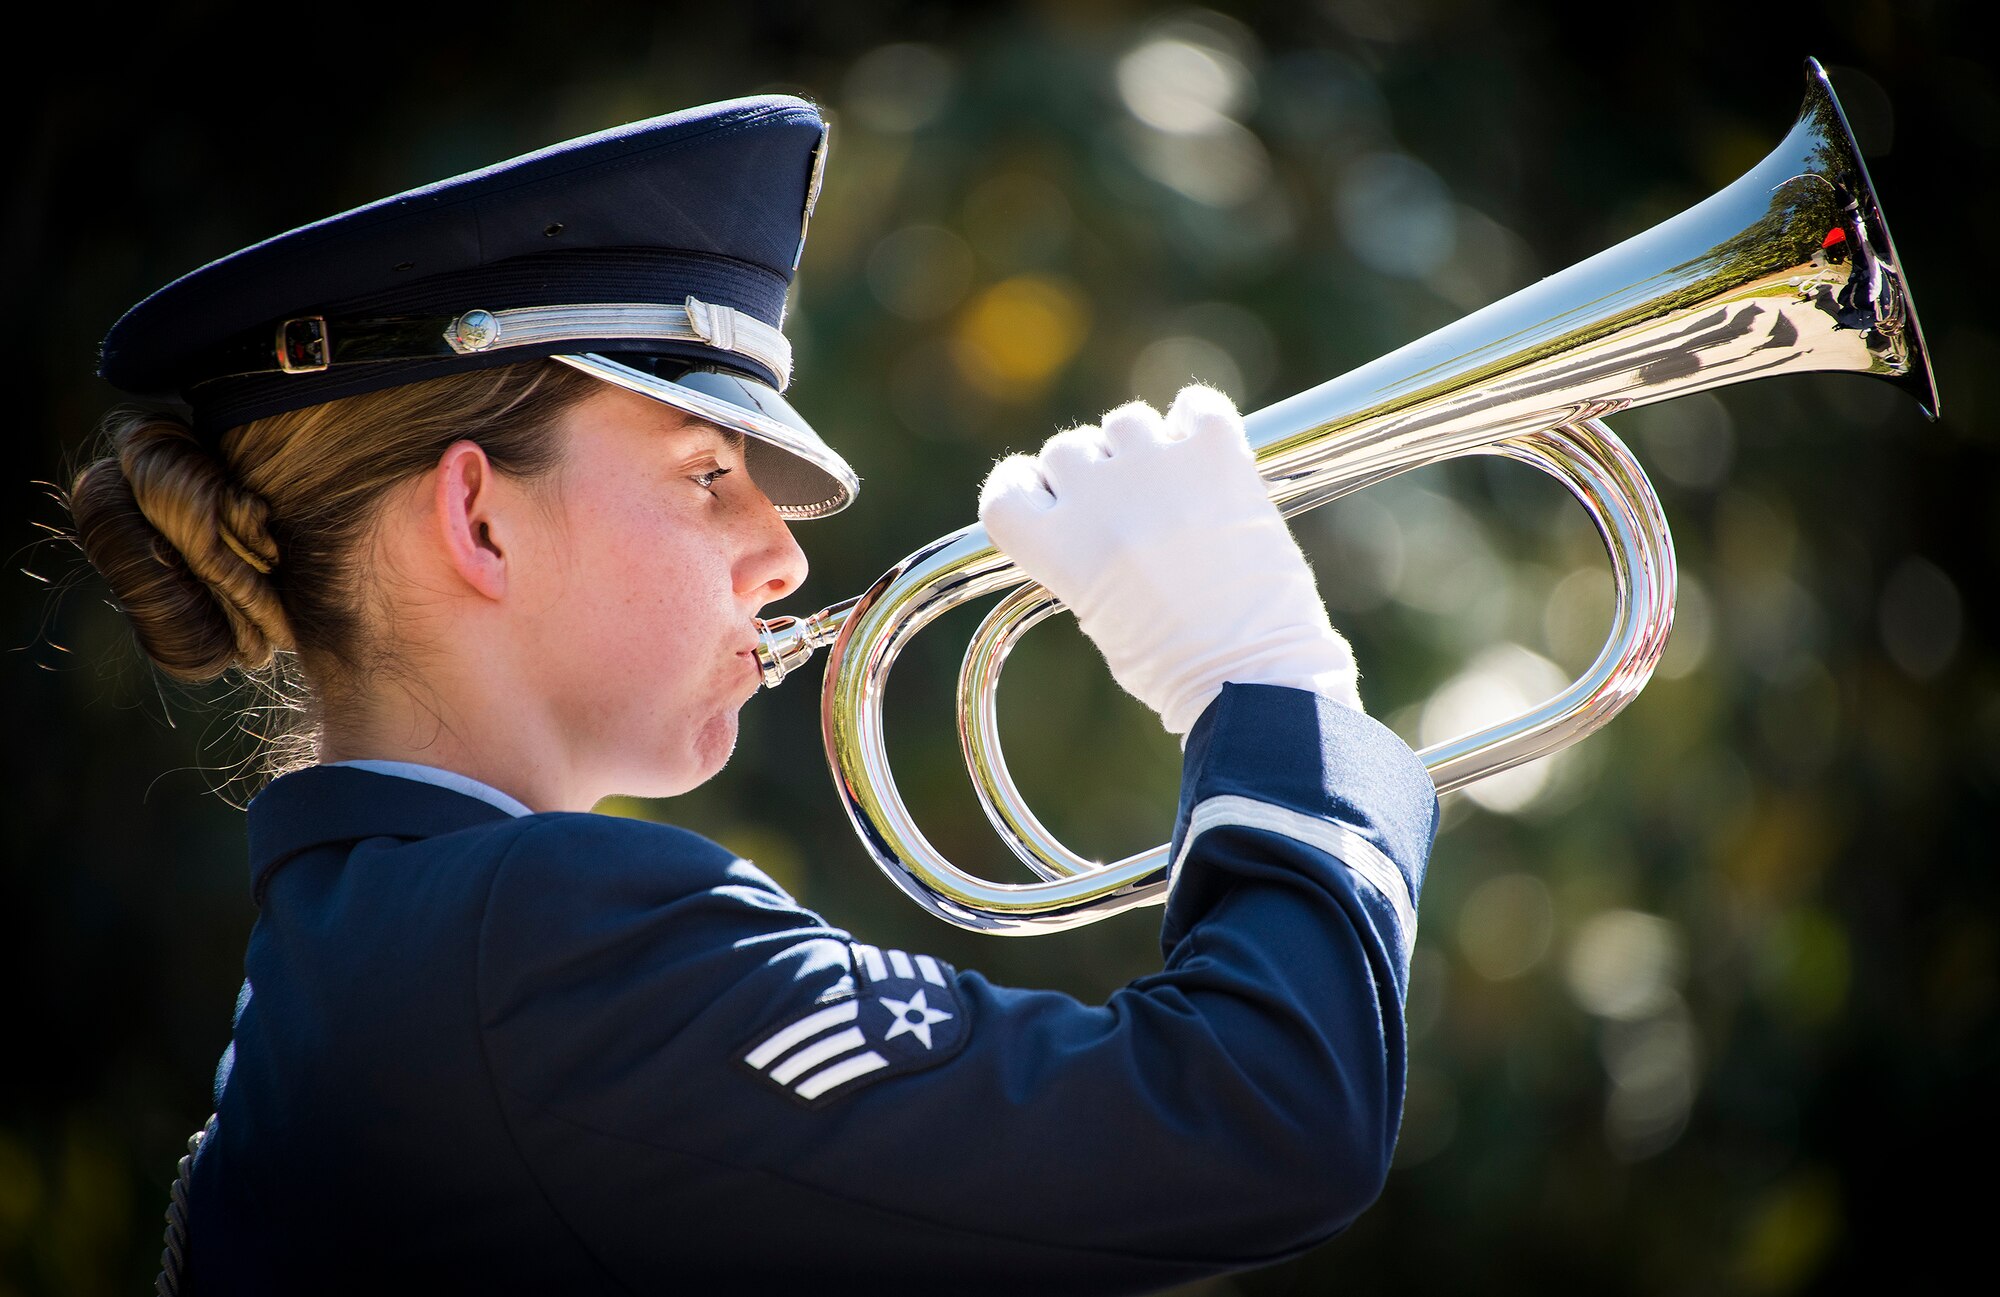 Senior Airman Makayla Scanlan, 96th Surgical Operations Squadron, holds the bugle in place as it plays taps at the 49th Annual Explosive Ordnance Disposal Memorial ceremony May 5, 2018. Names of recent fallen and past EOD technicians are added to the memorial wall and flags presented to their families during a ceremony each year at the Kauffman EOD Training Complex at Eglin Air Force Base, Fla. The Army and Navy added 12 new names this year. The all-service total now stands at 338. (U.S. Air Force photo by Samuel King Jr.)